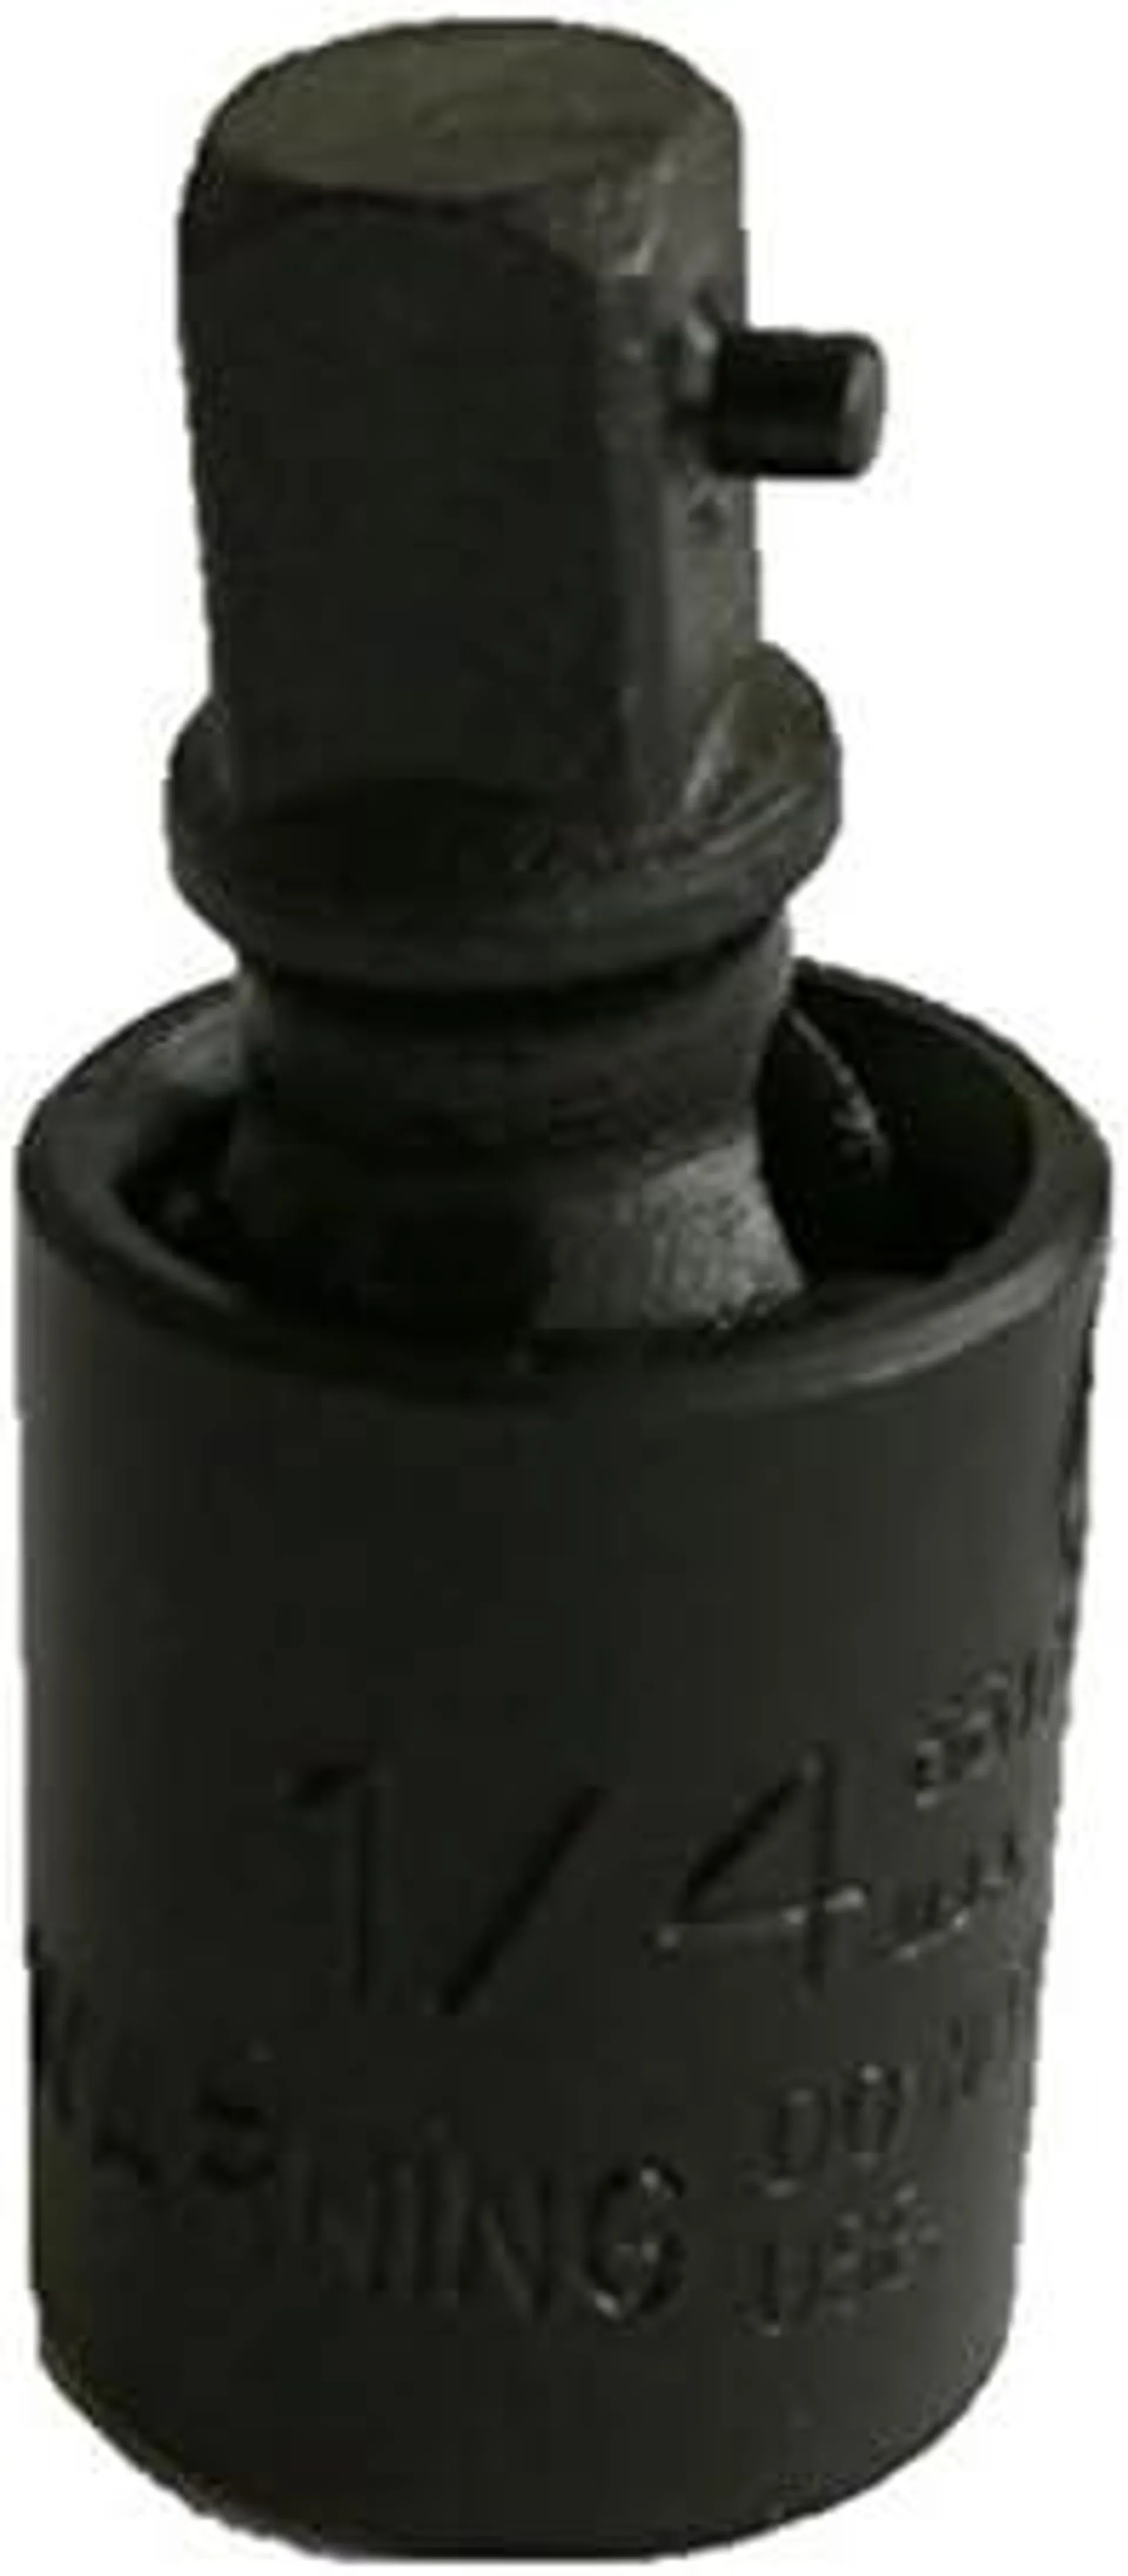 Stanley Proto J66170P 1/4-Inch Drive Impact Universal Joint